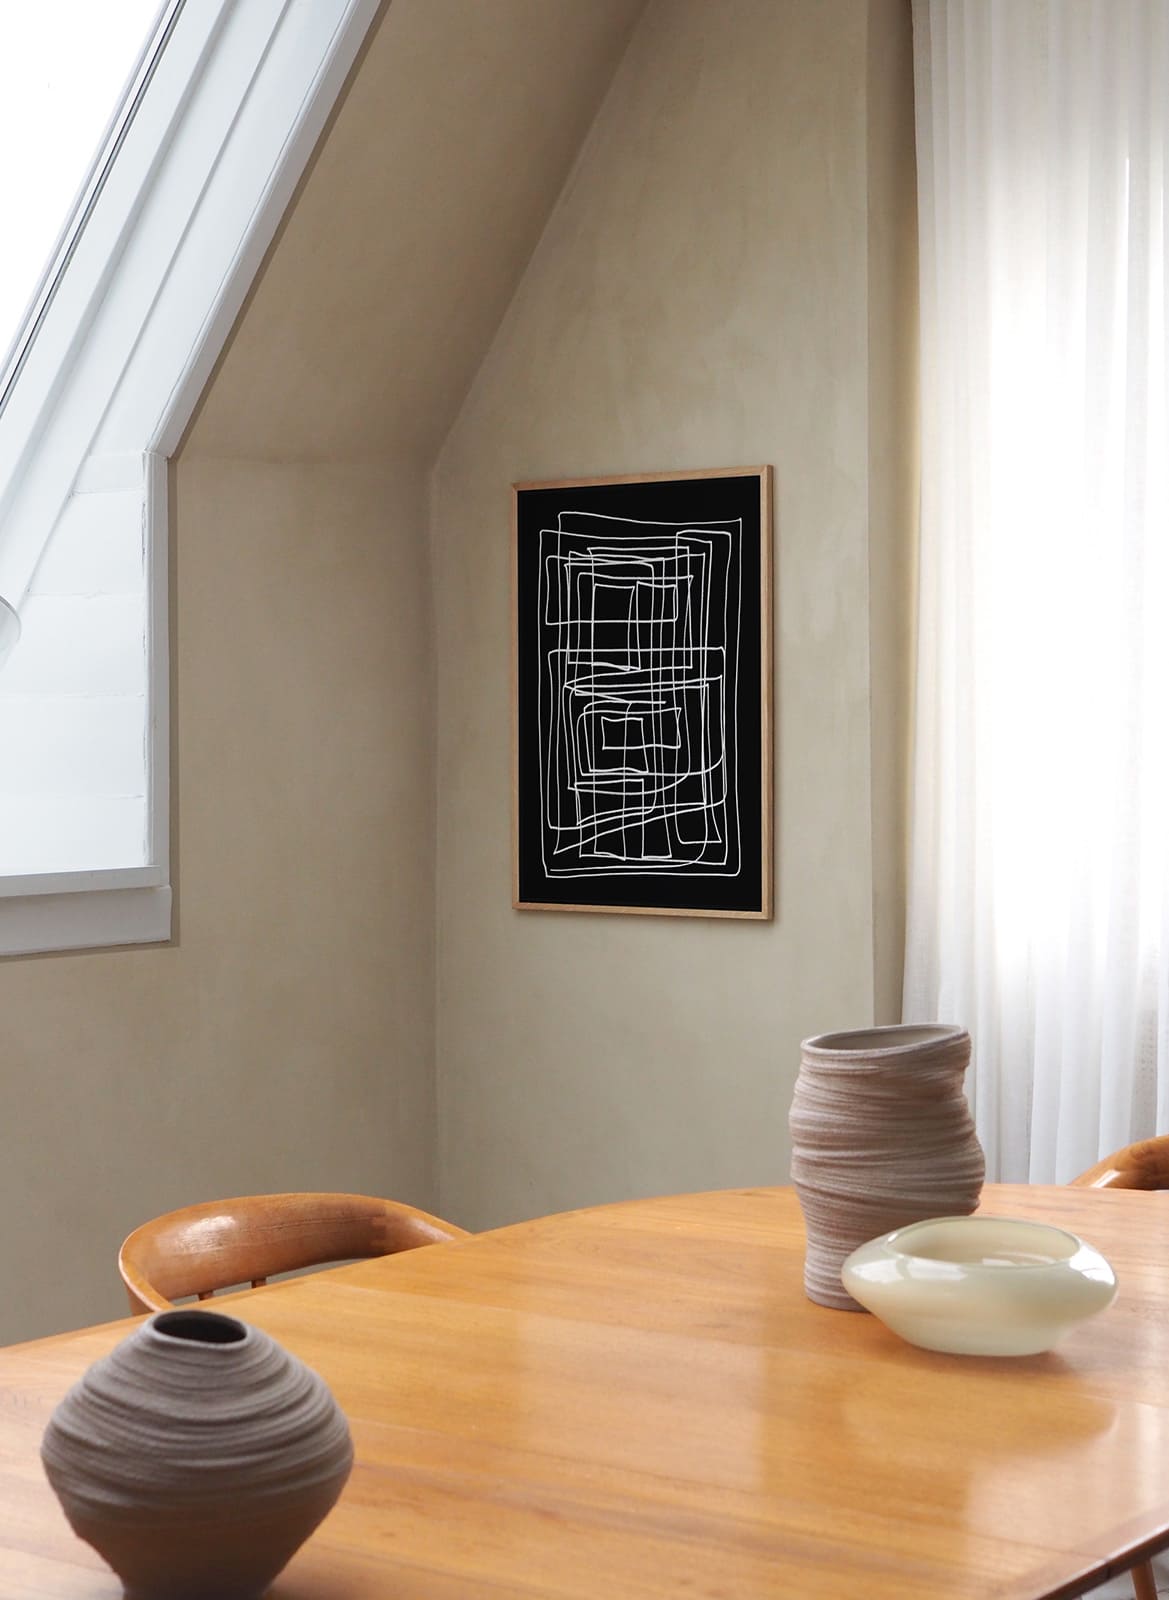 Framed black and white poster hanging above dining table by Atelier Cph